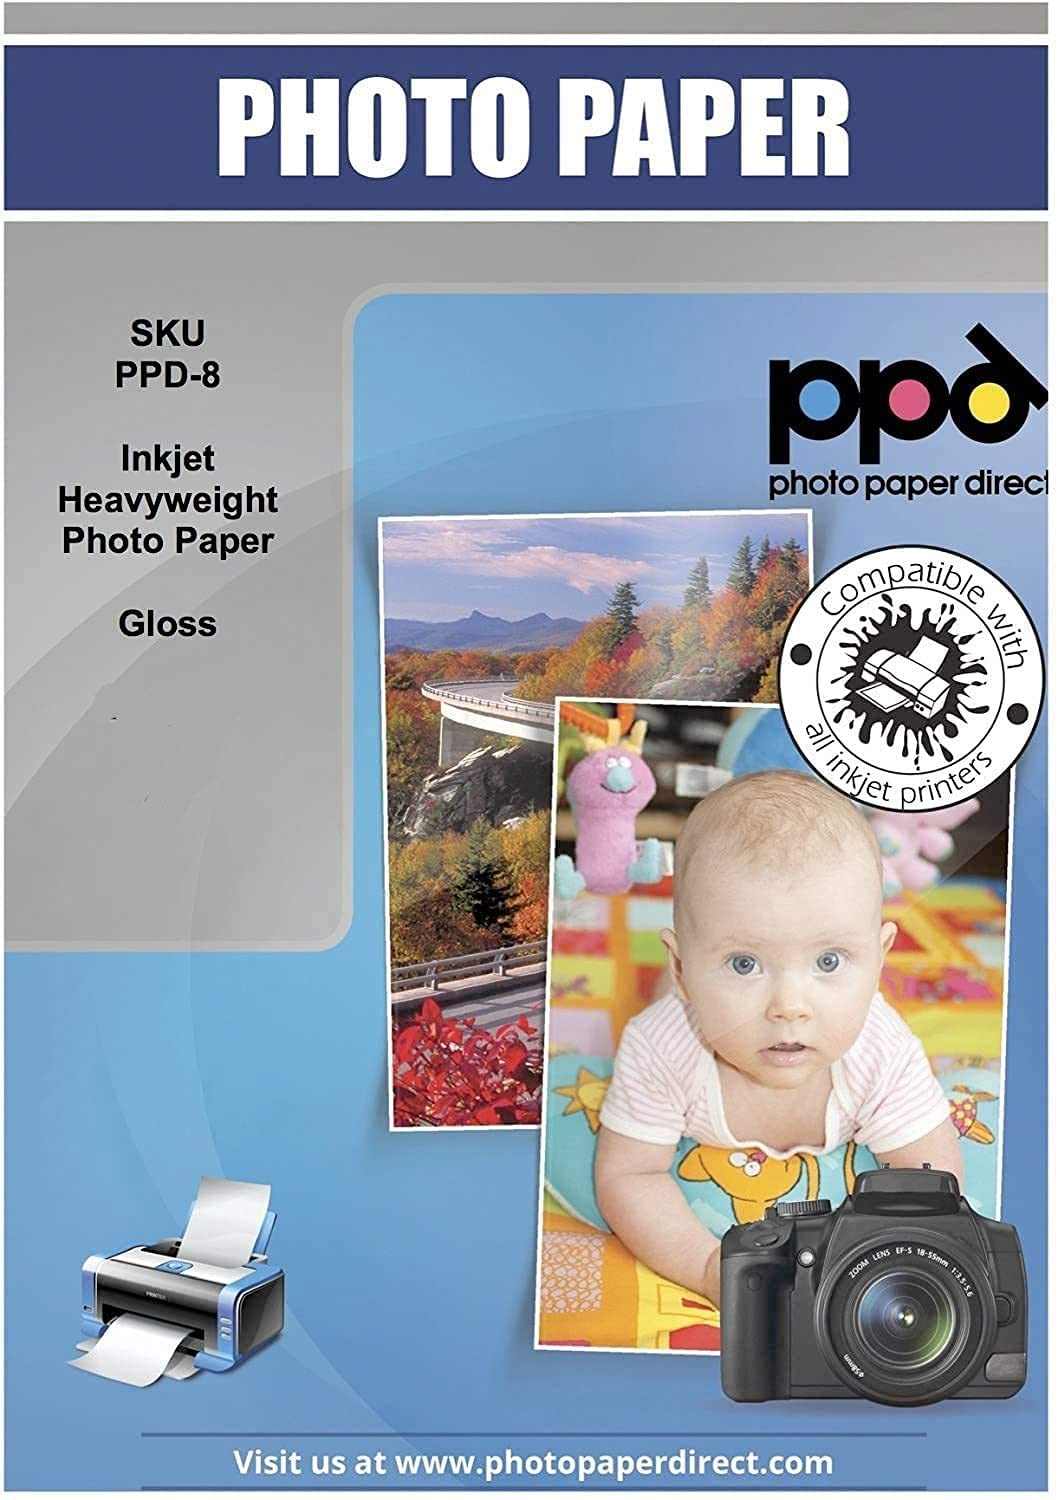 PPD Inkjet Heavyweight Photo Paper Glossy 64lb. 240gsm A4 PPD-8